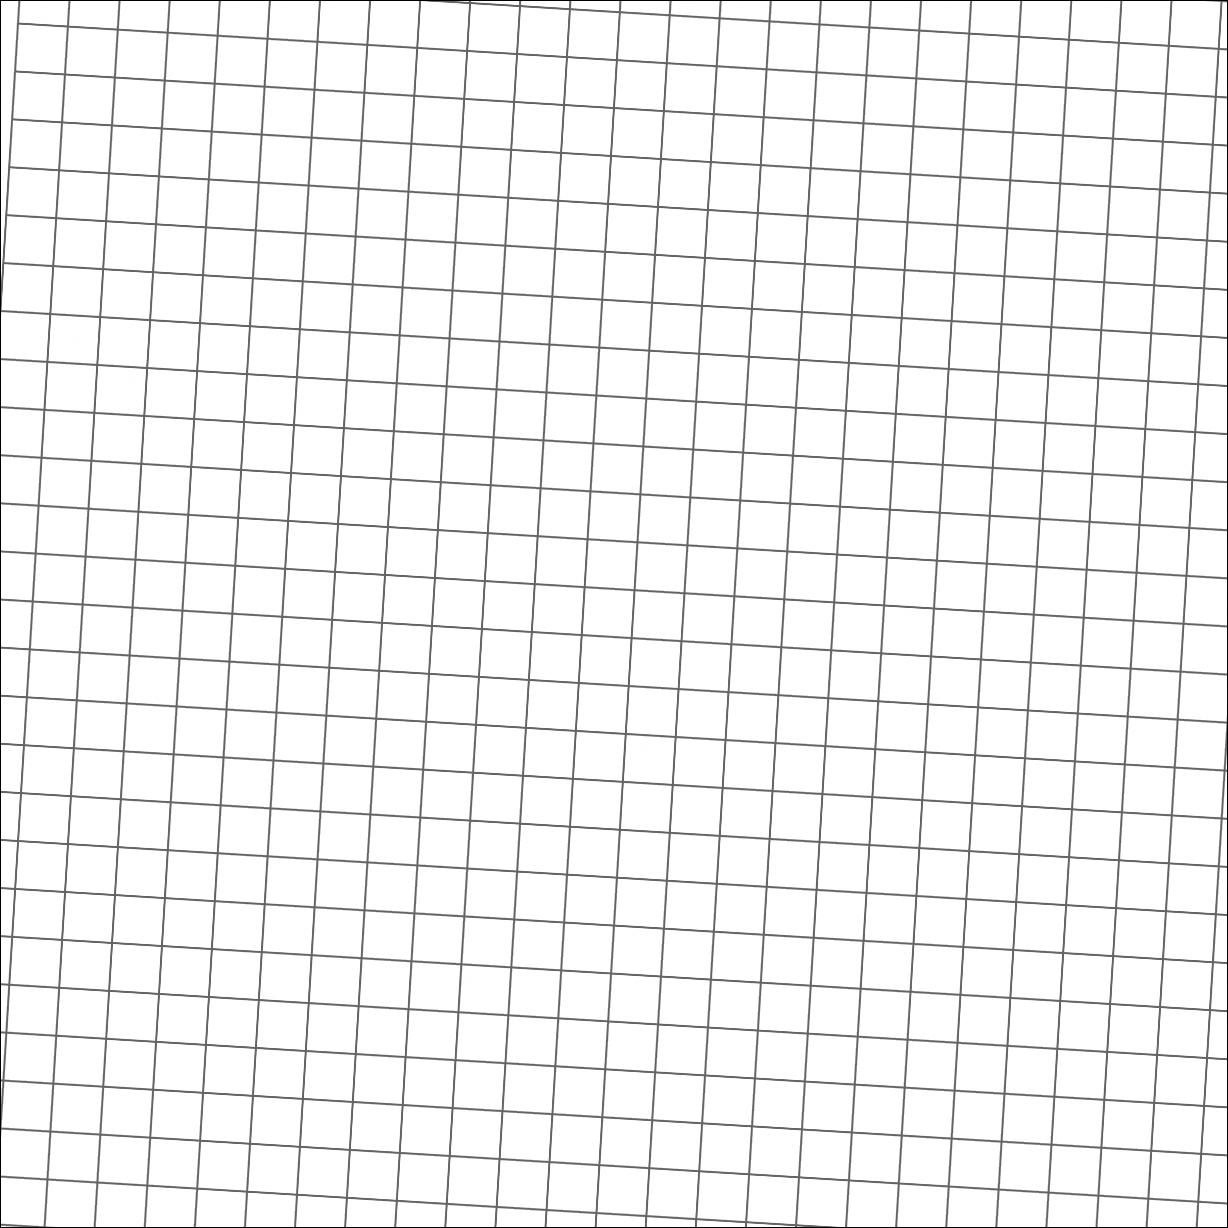 Free Printable Graph Paper! Blank Standard And Metric Graph Paper In - Free Printable Graph Paper 1 4 Inch